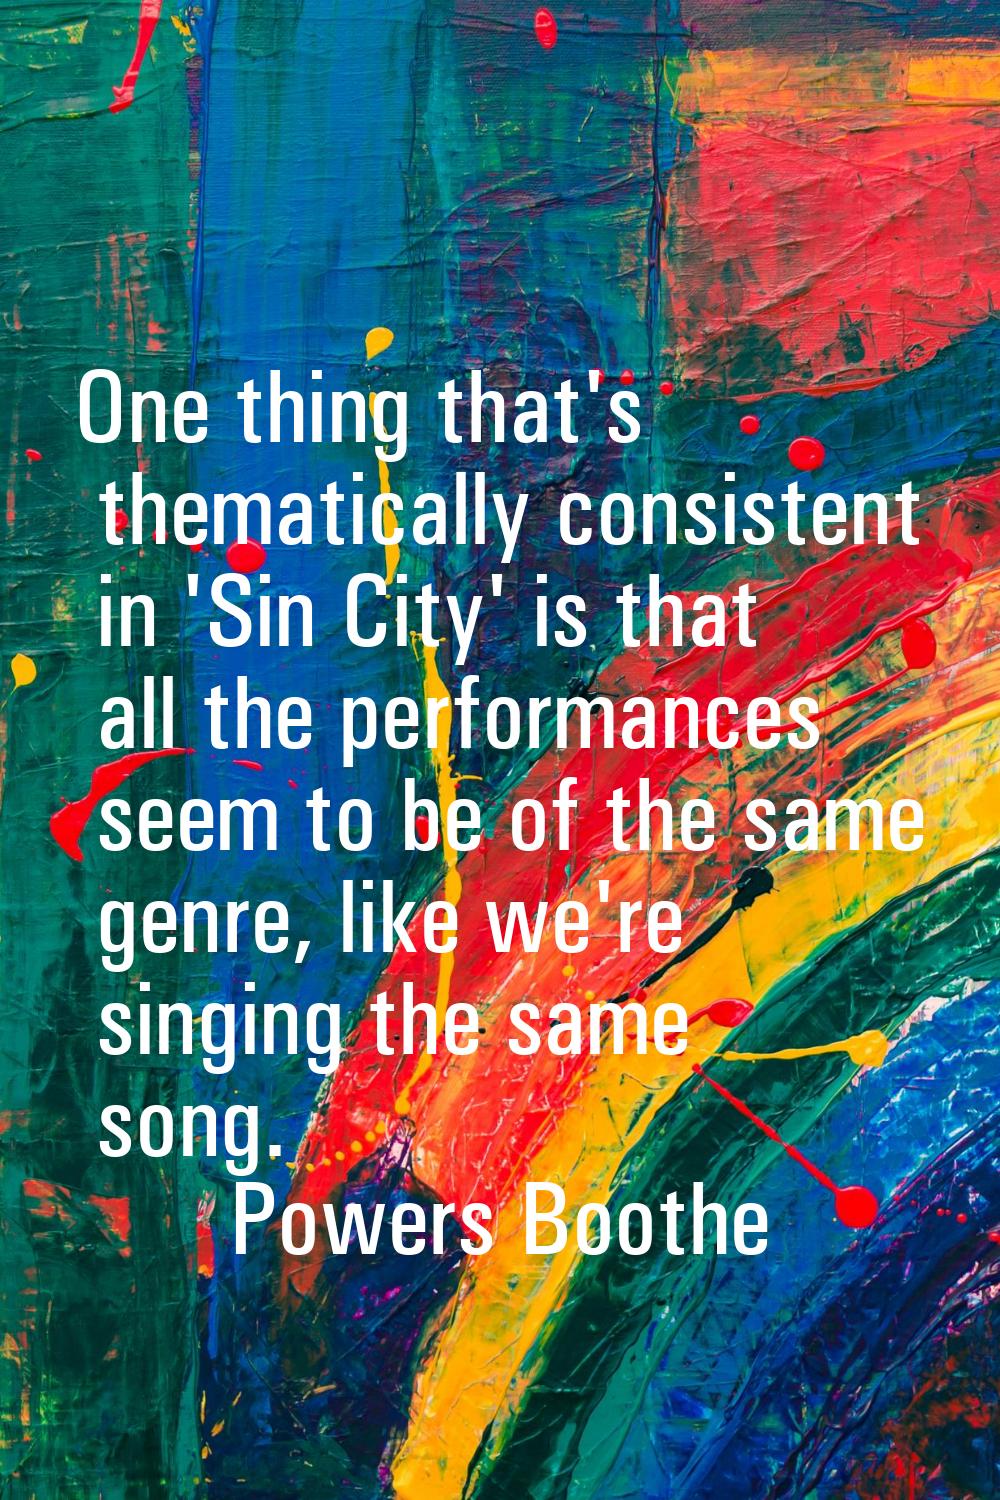 One thing that's thematically consistent in 'Sin City' is that all the performances seem to be of t